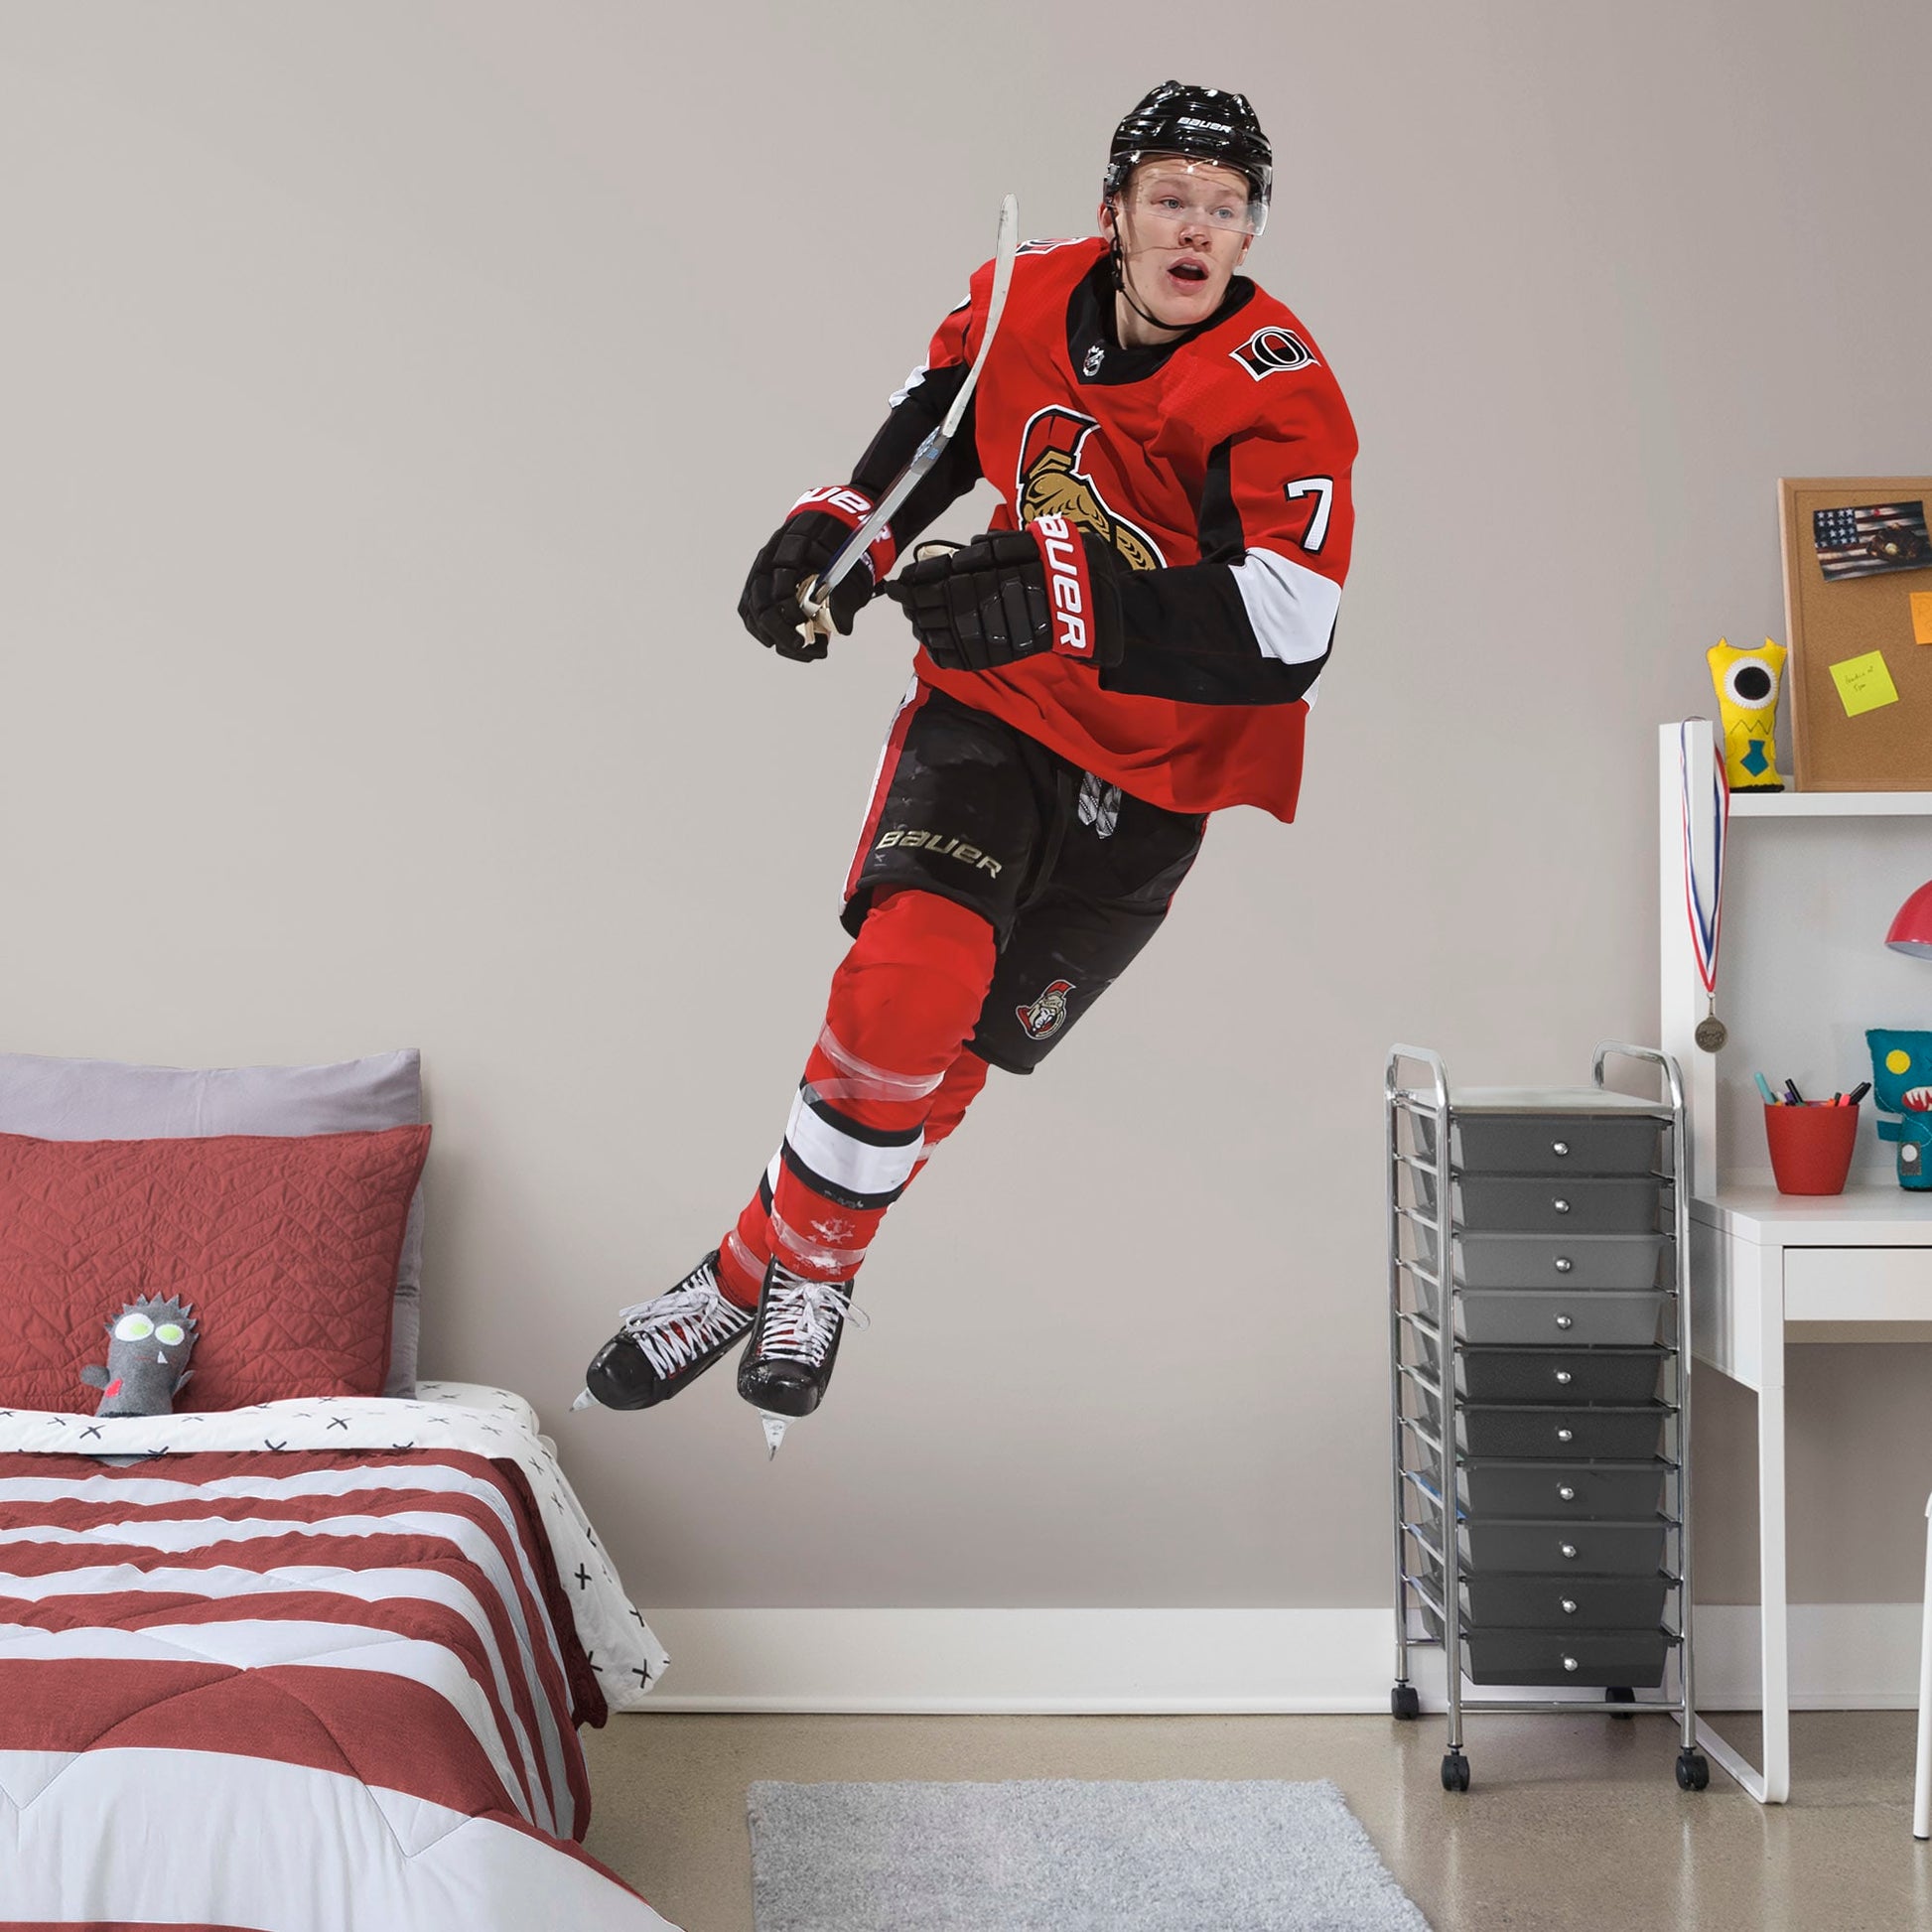 Life-Size Athlete + 2 Team Decals (44"W x 77"H) Power forward Brady Tkachuk quickly made his mark in the NHL when he lead the Senators to victory, and now he's skating to life in your office, bedroom, or fan room in this Officially Licensed NHL wall decal. Ottawa fans and NHL fanatics alike will love the touch of action that Tkachuk brings, and this durable and removable wall decal will definitely stand up to the challenge, no matter how many times you move and restick it!